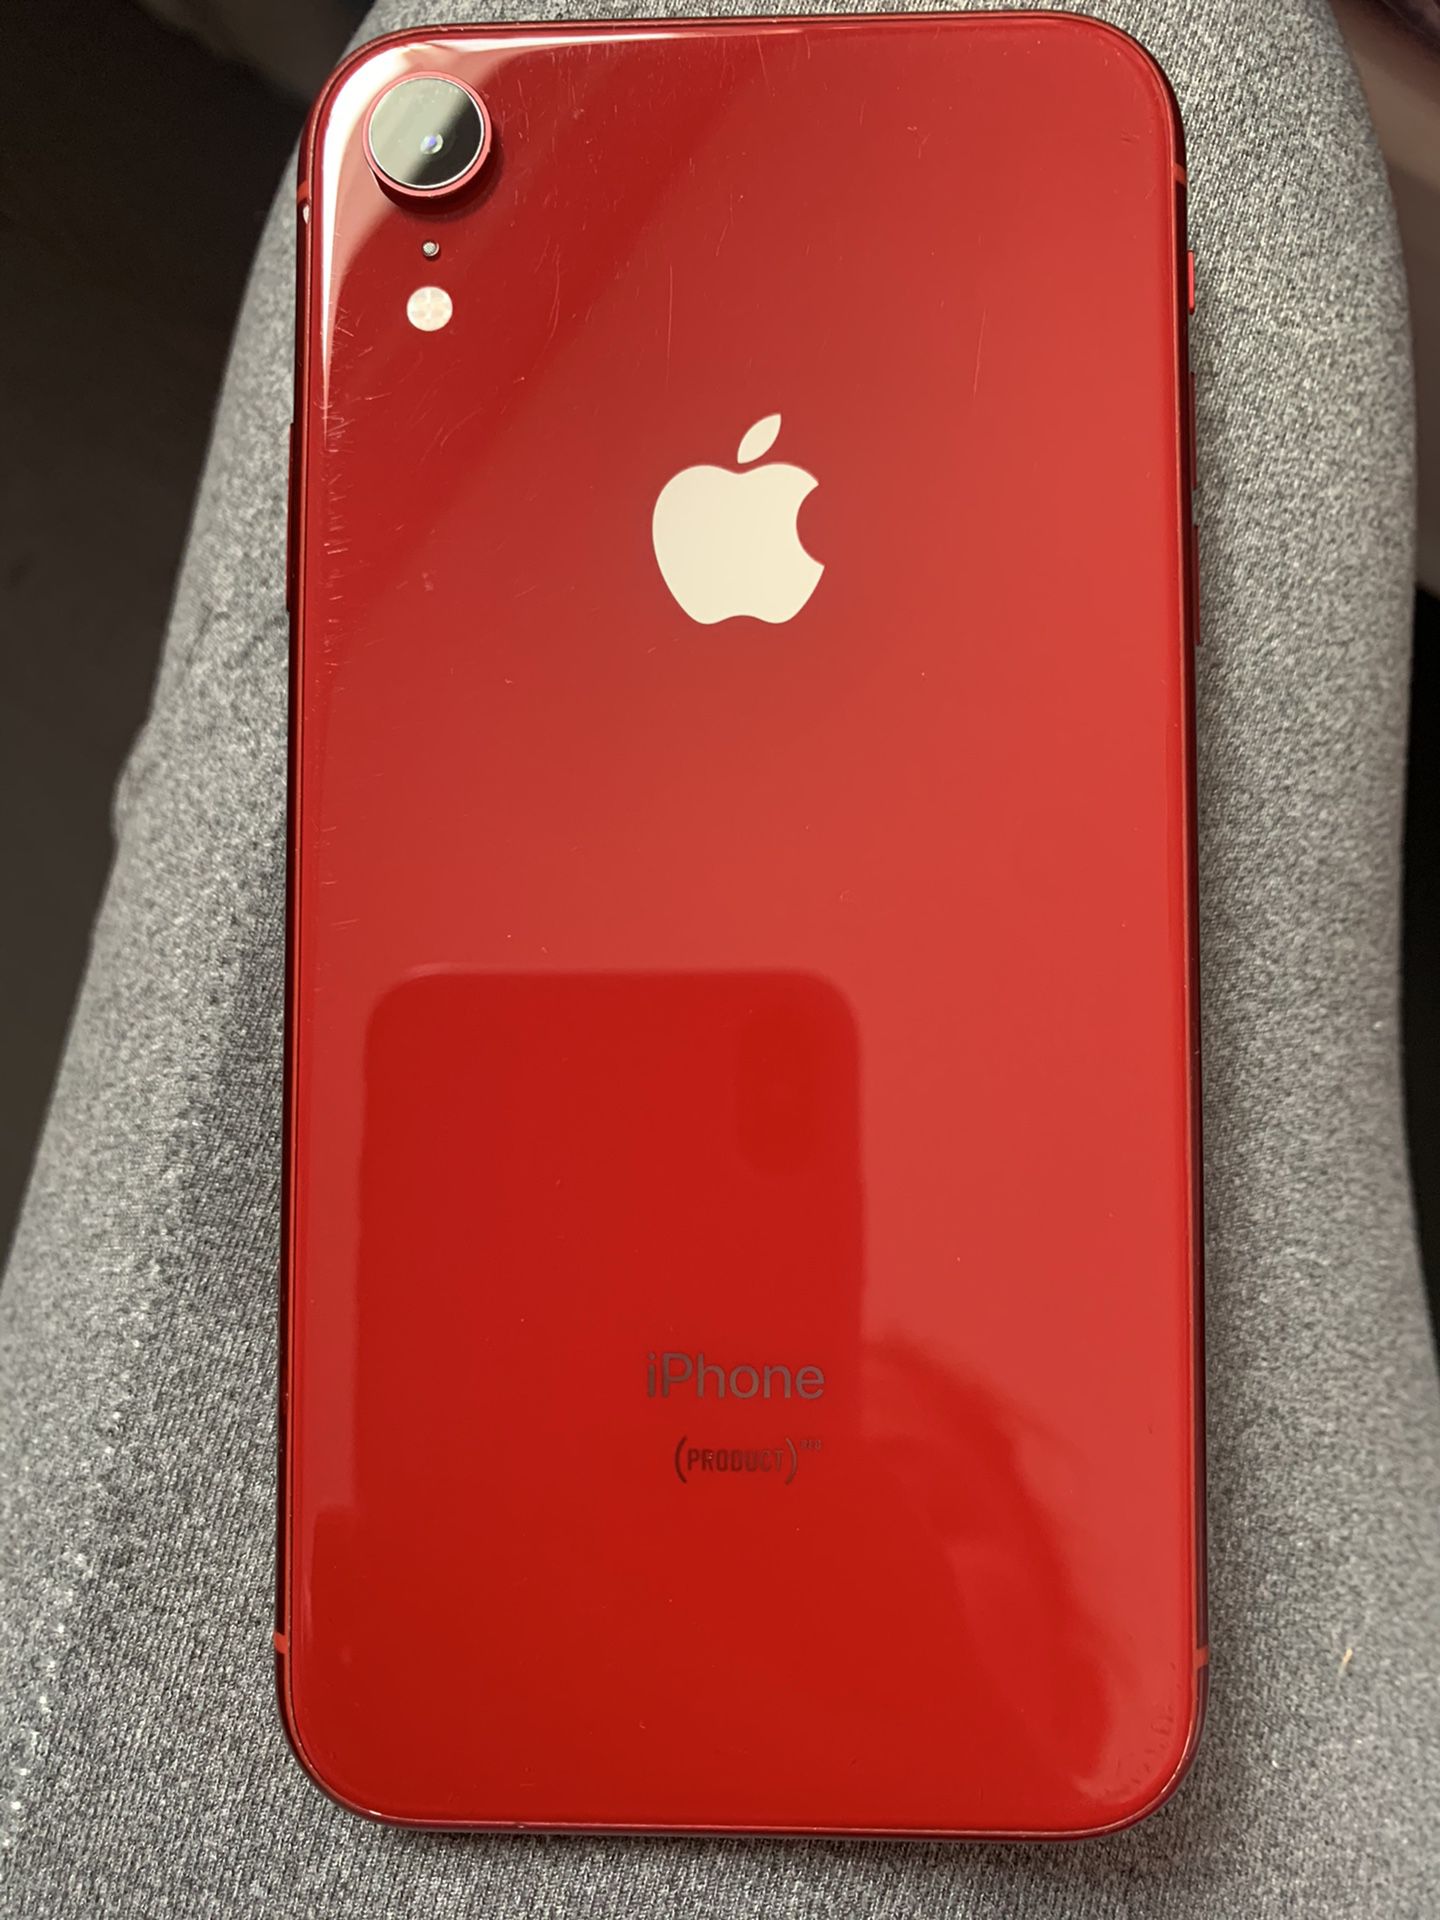 iPhone XR for sprint